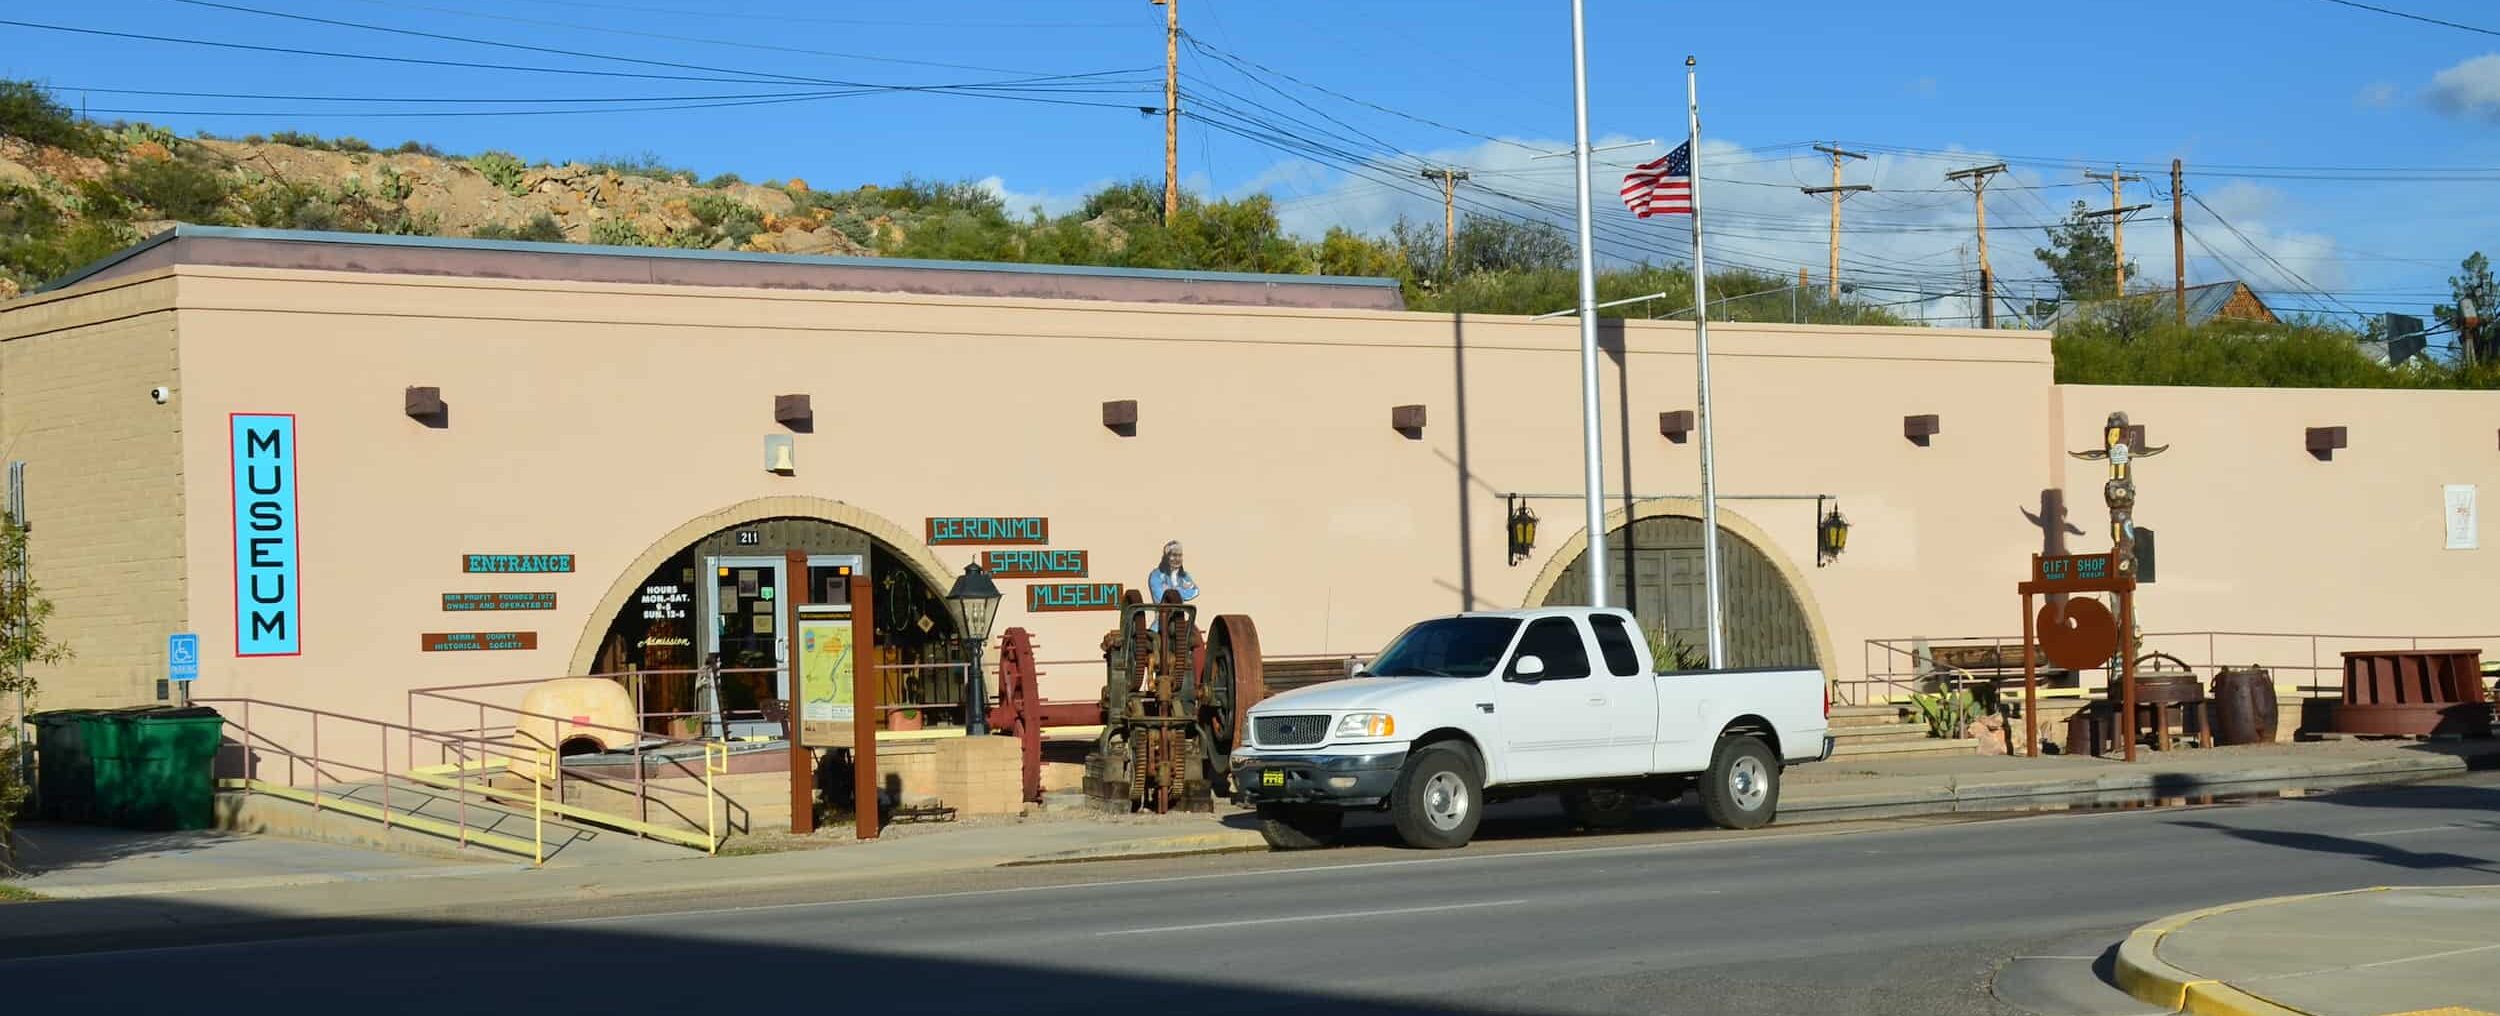 Geronimo Springs Museum in Truth or Consequences, New Mexico